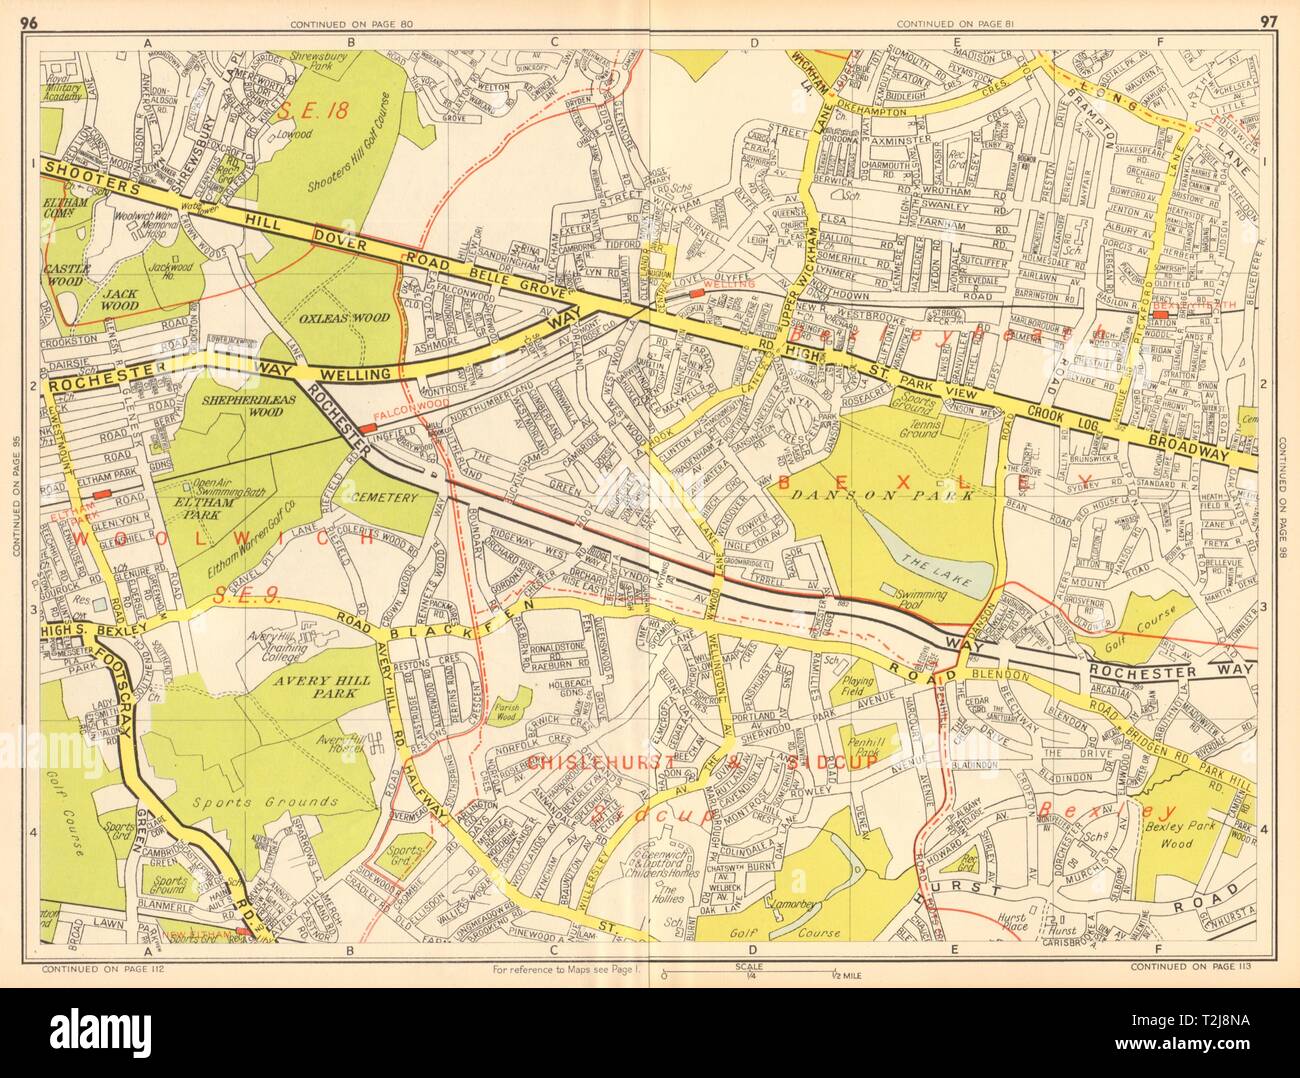 BEXLEY Bexleyheath Yvoir East Wickham Shooters Hill. GEOGRAPHERS' A-Z map 1948 Banque D'Images